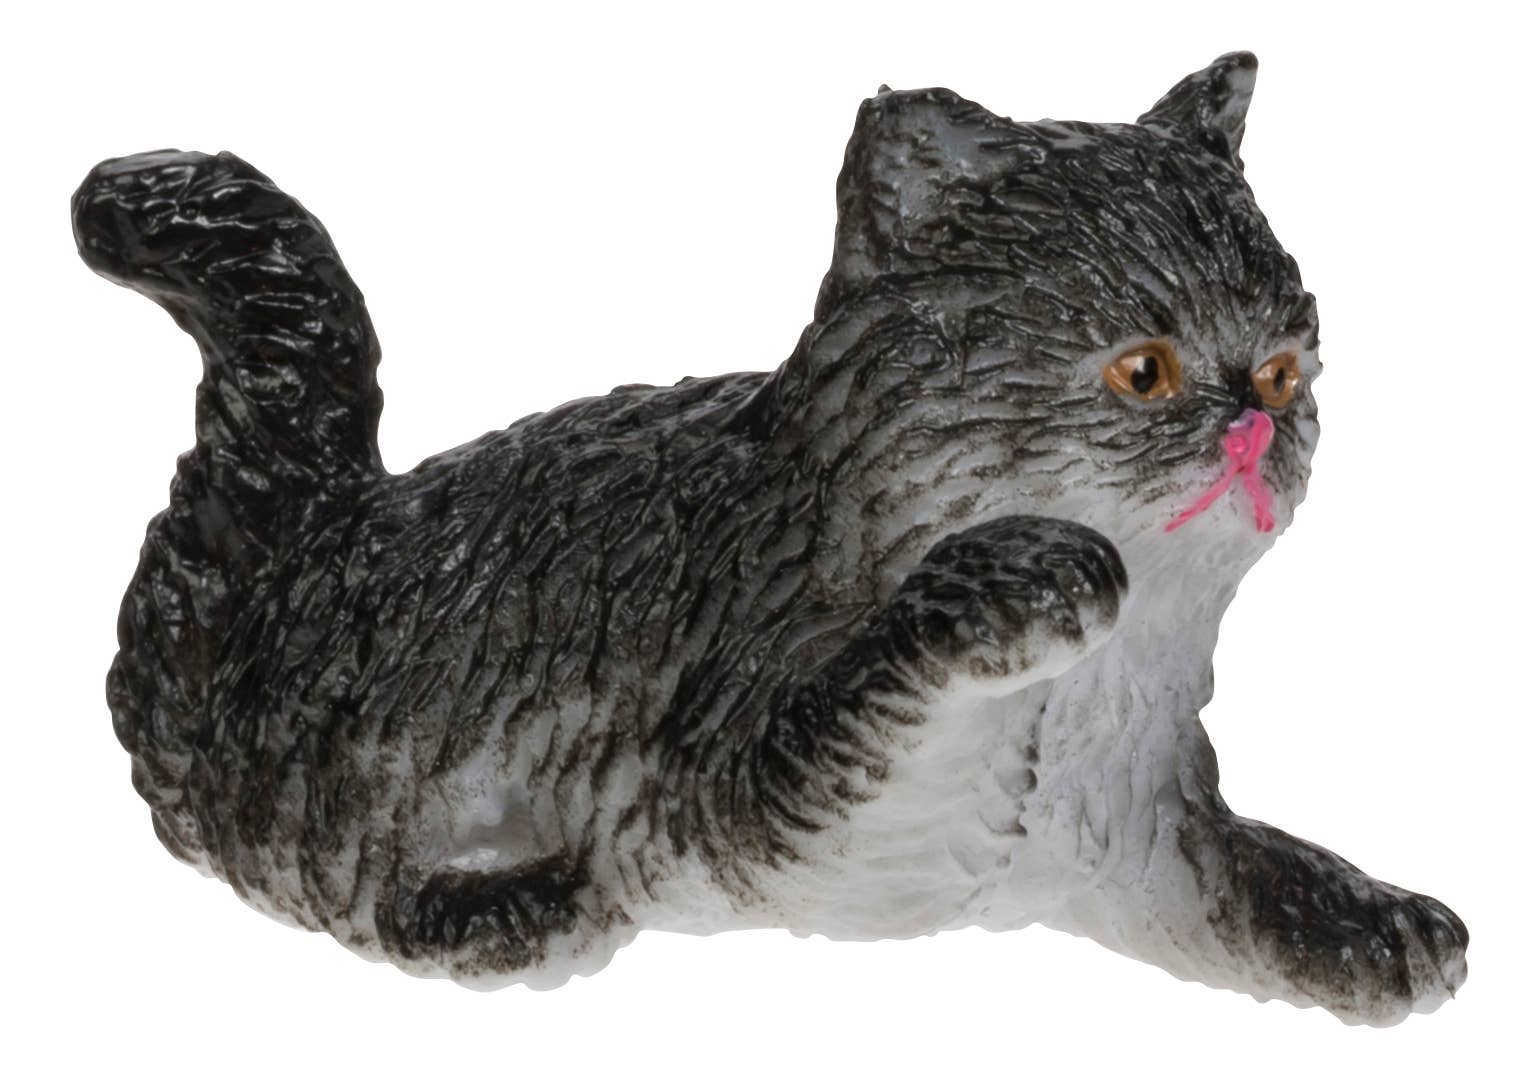 Puppies And Kitties, Assorted, 14.5" Toy Figures